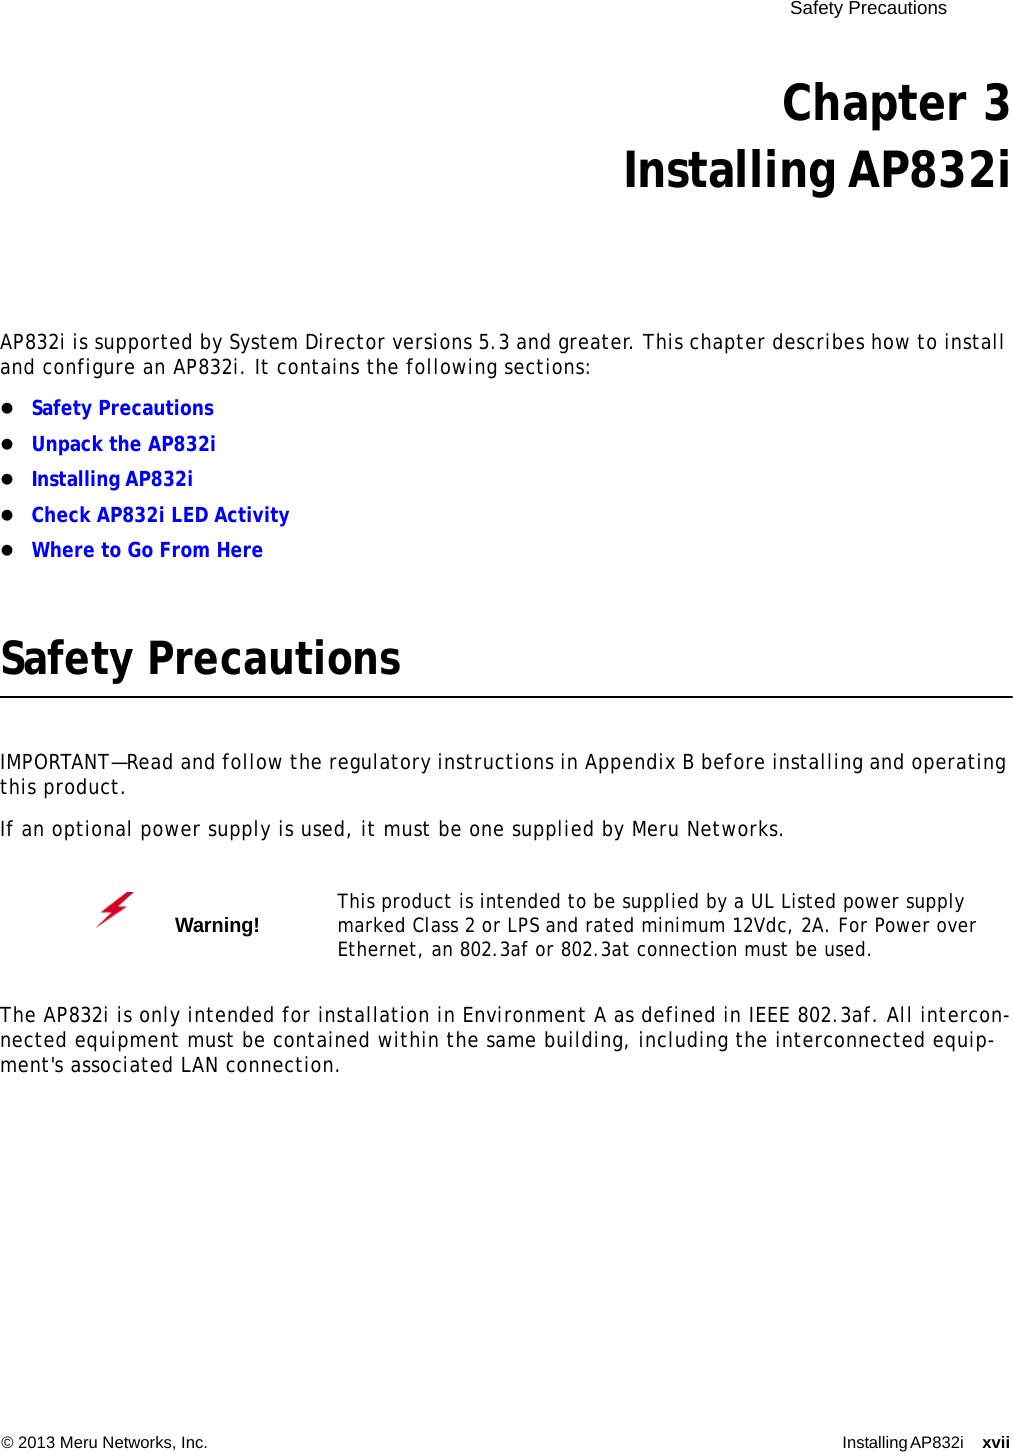  Safety Precautions © 2013 Meru Networks, Inc. Installing AP832i xvii Chapter 3Installing AP832iAP832i is supported by System Director versions 5.3 and greater. This chapter describes how to install and configure an AP832i. It contains the following sections:Safety PrecautionsUnpack the AP832iInstalling AP832iCheck AP832i LED ActivityWhere to Go From HereSafety PrecautionsIMPORTANT—Read and follow the regulatory instructions in Appendix B before installing and operating this product.If an optional power supply is used, it must be one supplied by Meru Networks.The AP832i is only intended for installation in Environment A as defined in IEEE 802.3af. All intercon-nected equipment must be contained within the same building, including the interconnected equip-ment&apos;s associated LAN connection.Warning!   This product is intended to be supplied by a UL Listed power supply marked Class 2 or LPS and rated minimum 12Vdc, 2A. For Power over Ethernet, an 802.3af or 802.3at connection must be used.